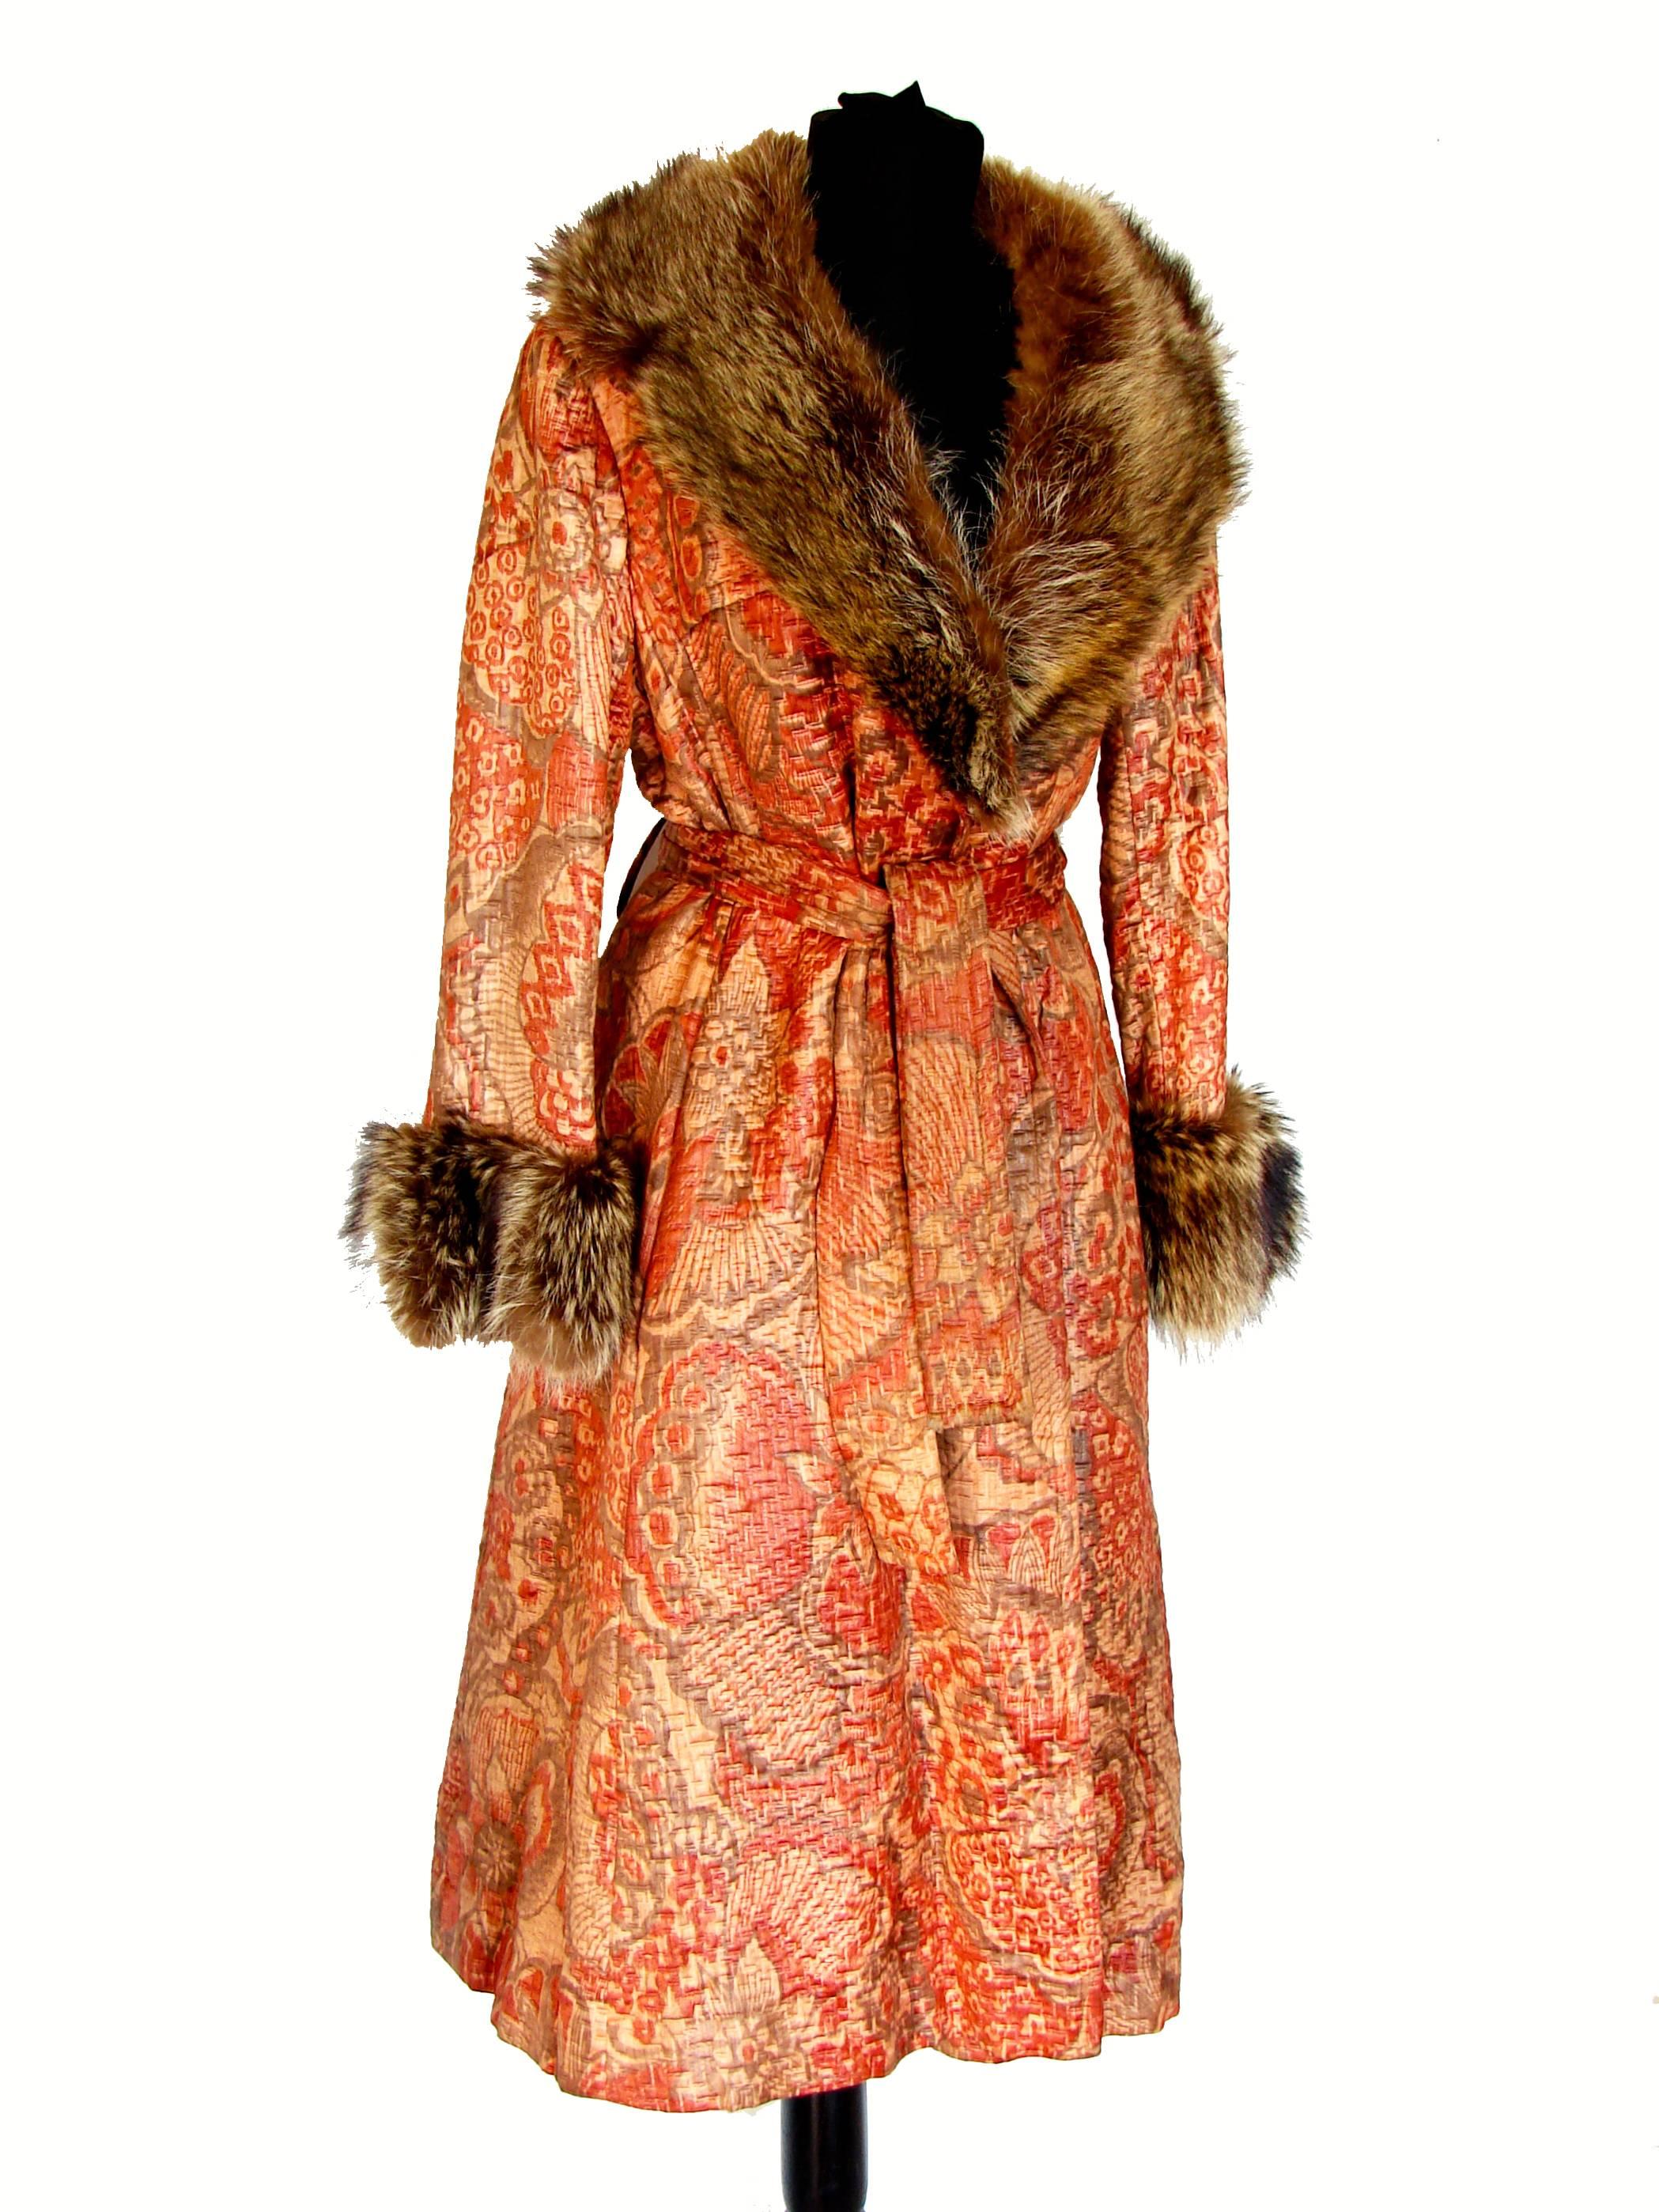 This hard to find textured silk coat with raccoon fur trim by Bill Blass for Bond Street dates to the early 70s.  Made from the most supple textured silk in shades of coral, taupe and beige, it features a wide raccoon fur collar and matching trimmed